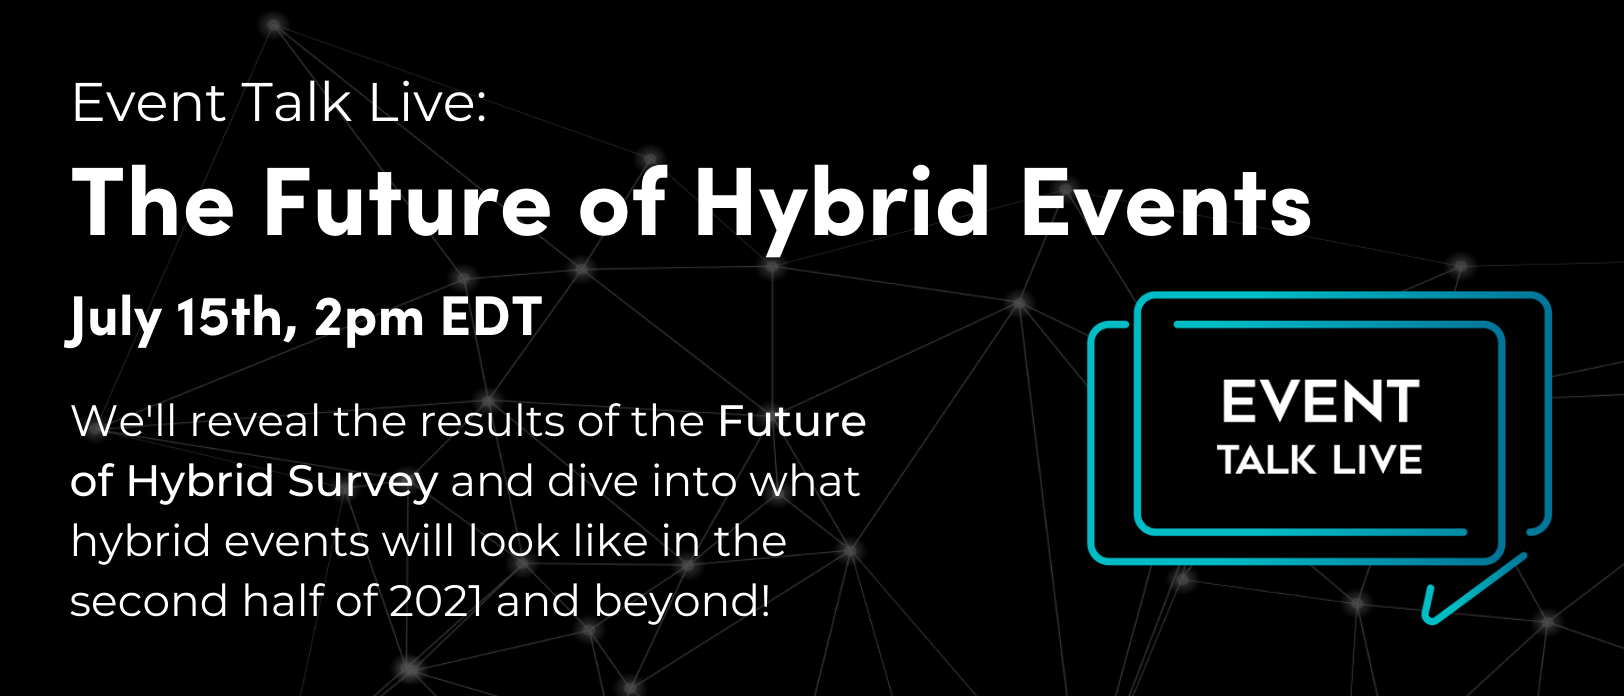 Event Talk Live: The Future of Hybrid Events, Suffolk, Massachusetts, United States